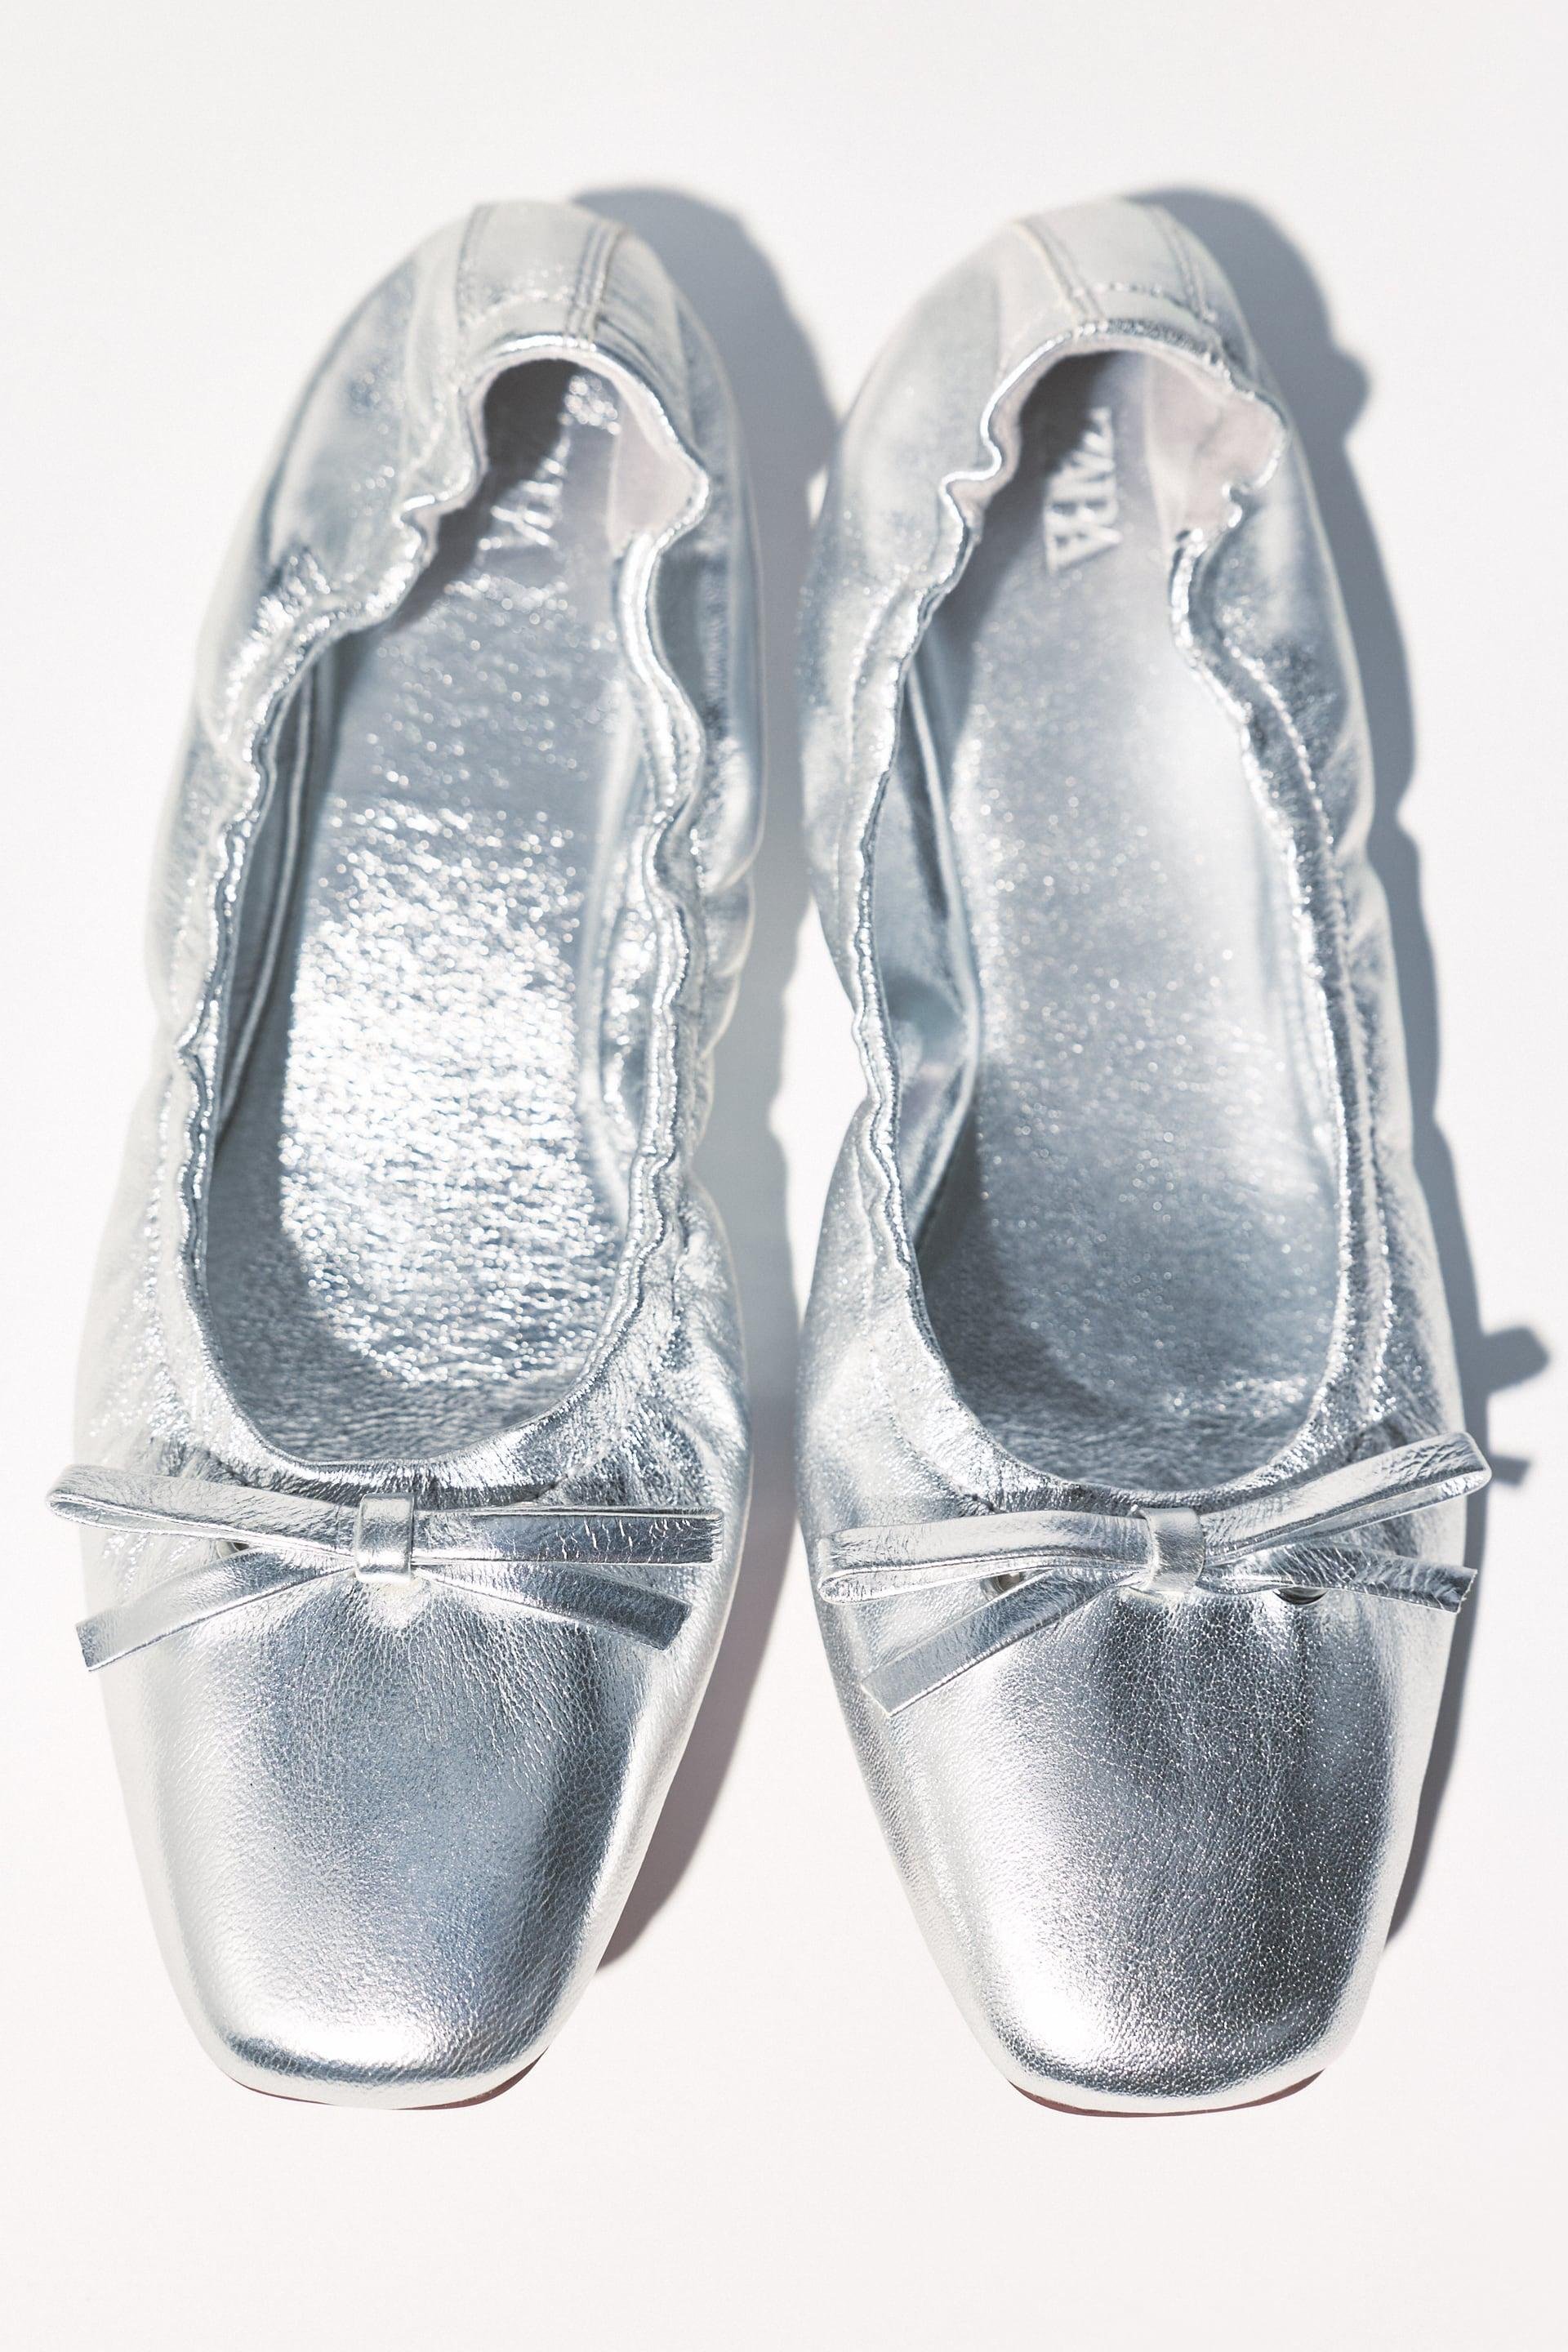 METALLIC GATHERED BALLET FLATS WITH BOW by ZARA